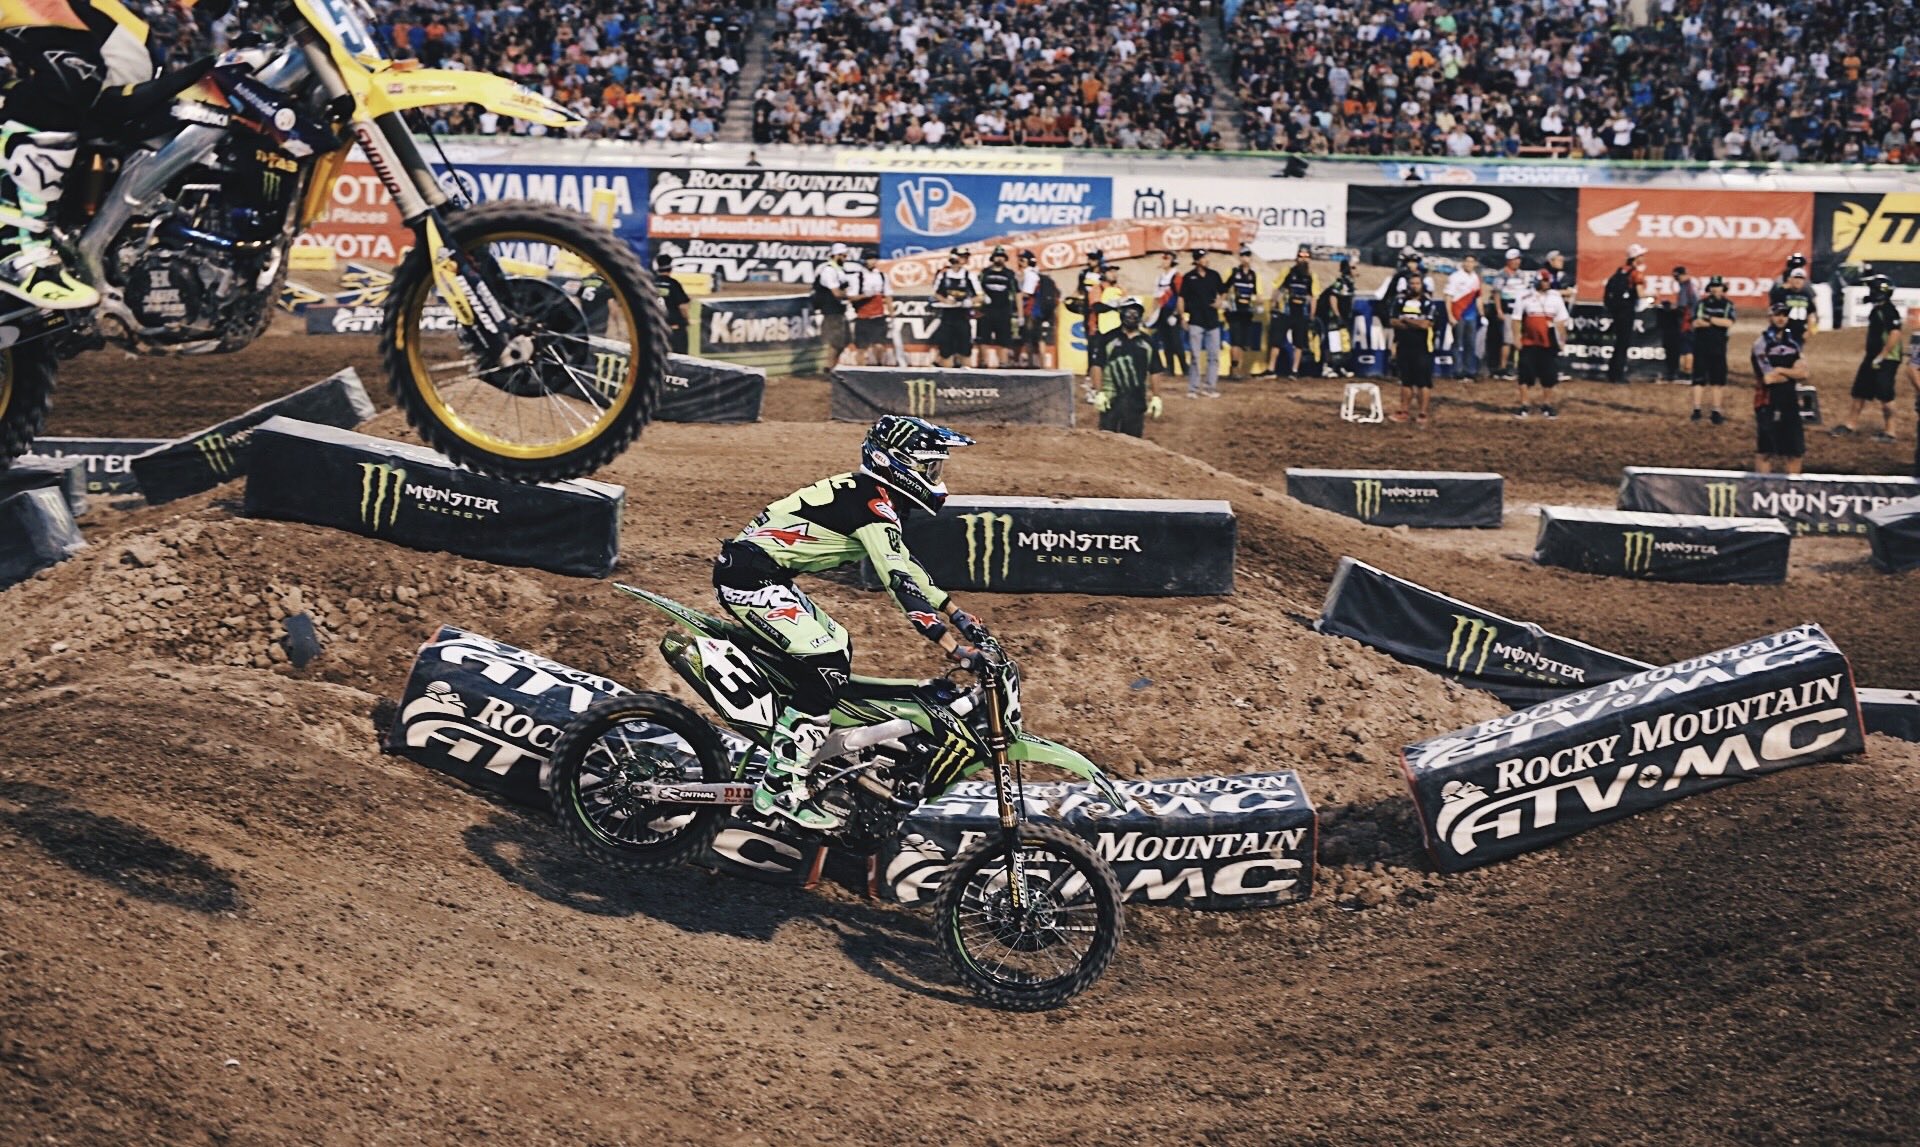 DTKAustin shares her experience at the last 2017 Supercross race of the season in Las Vegas.